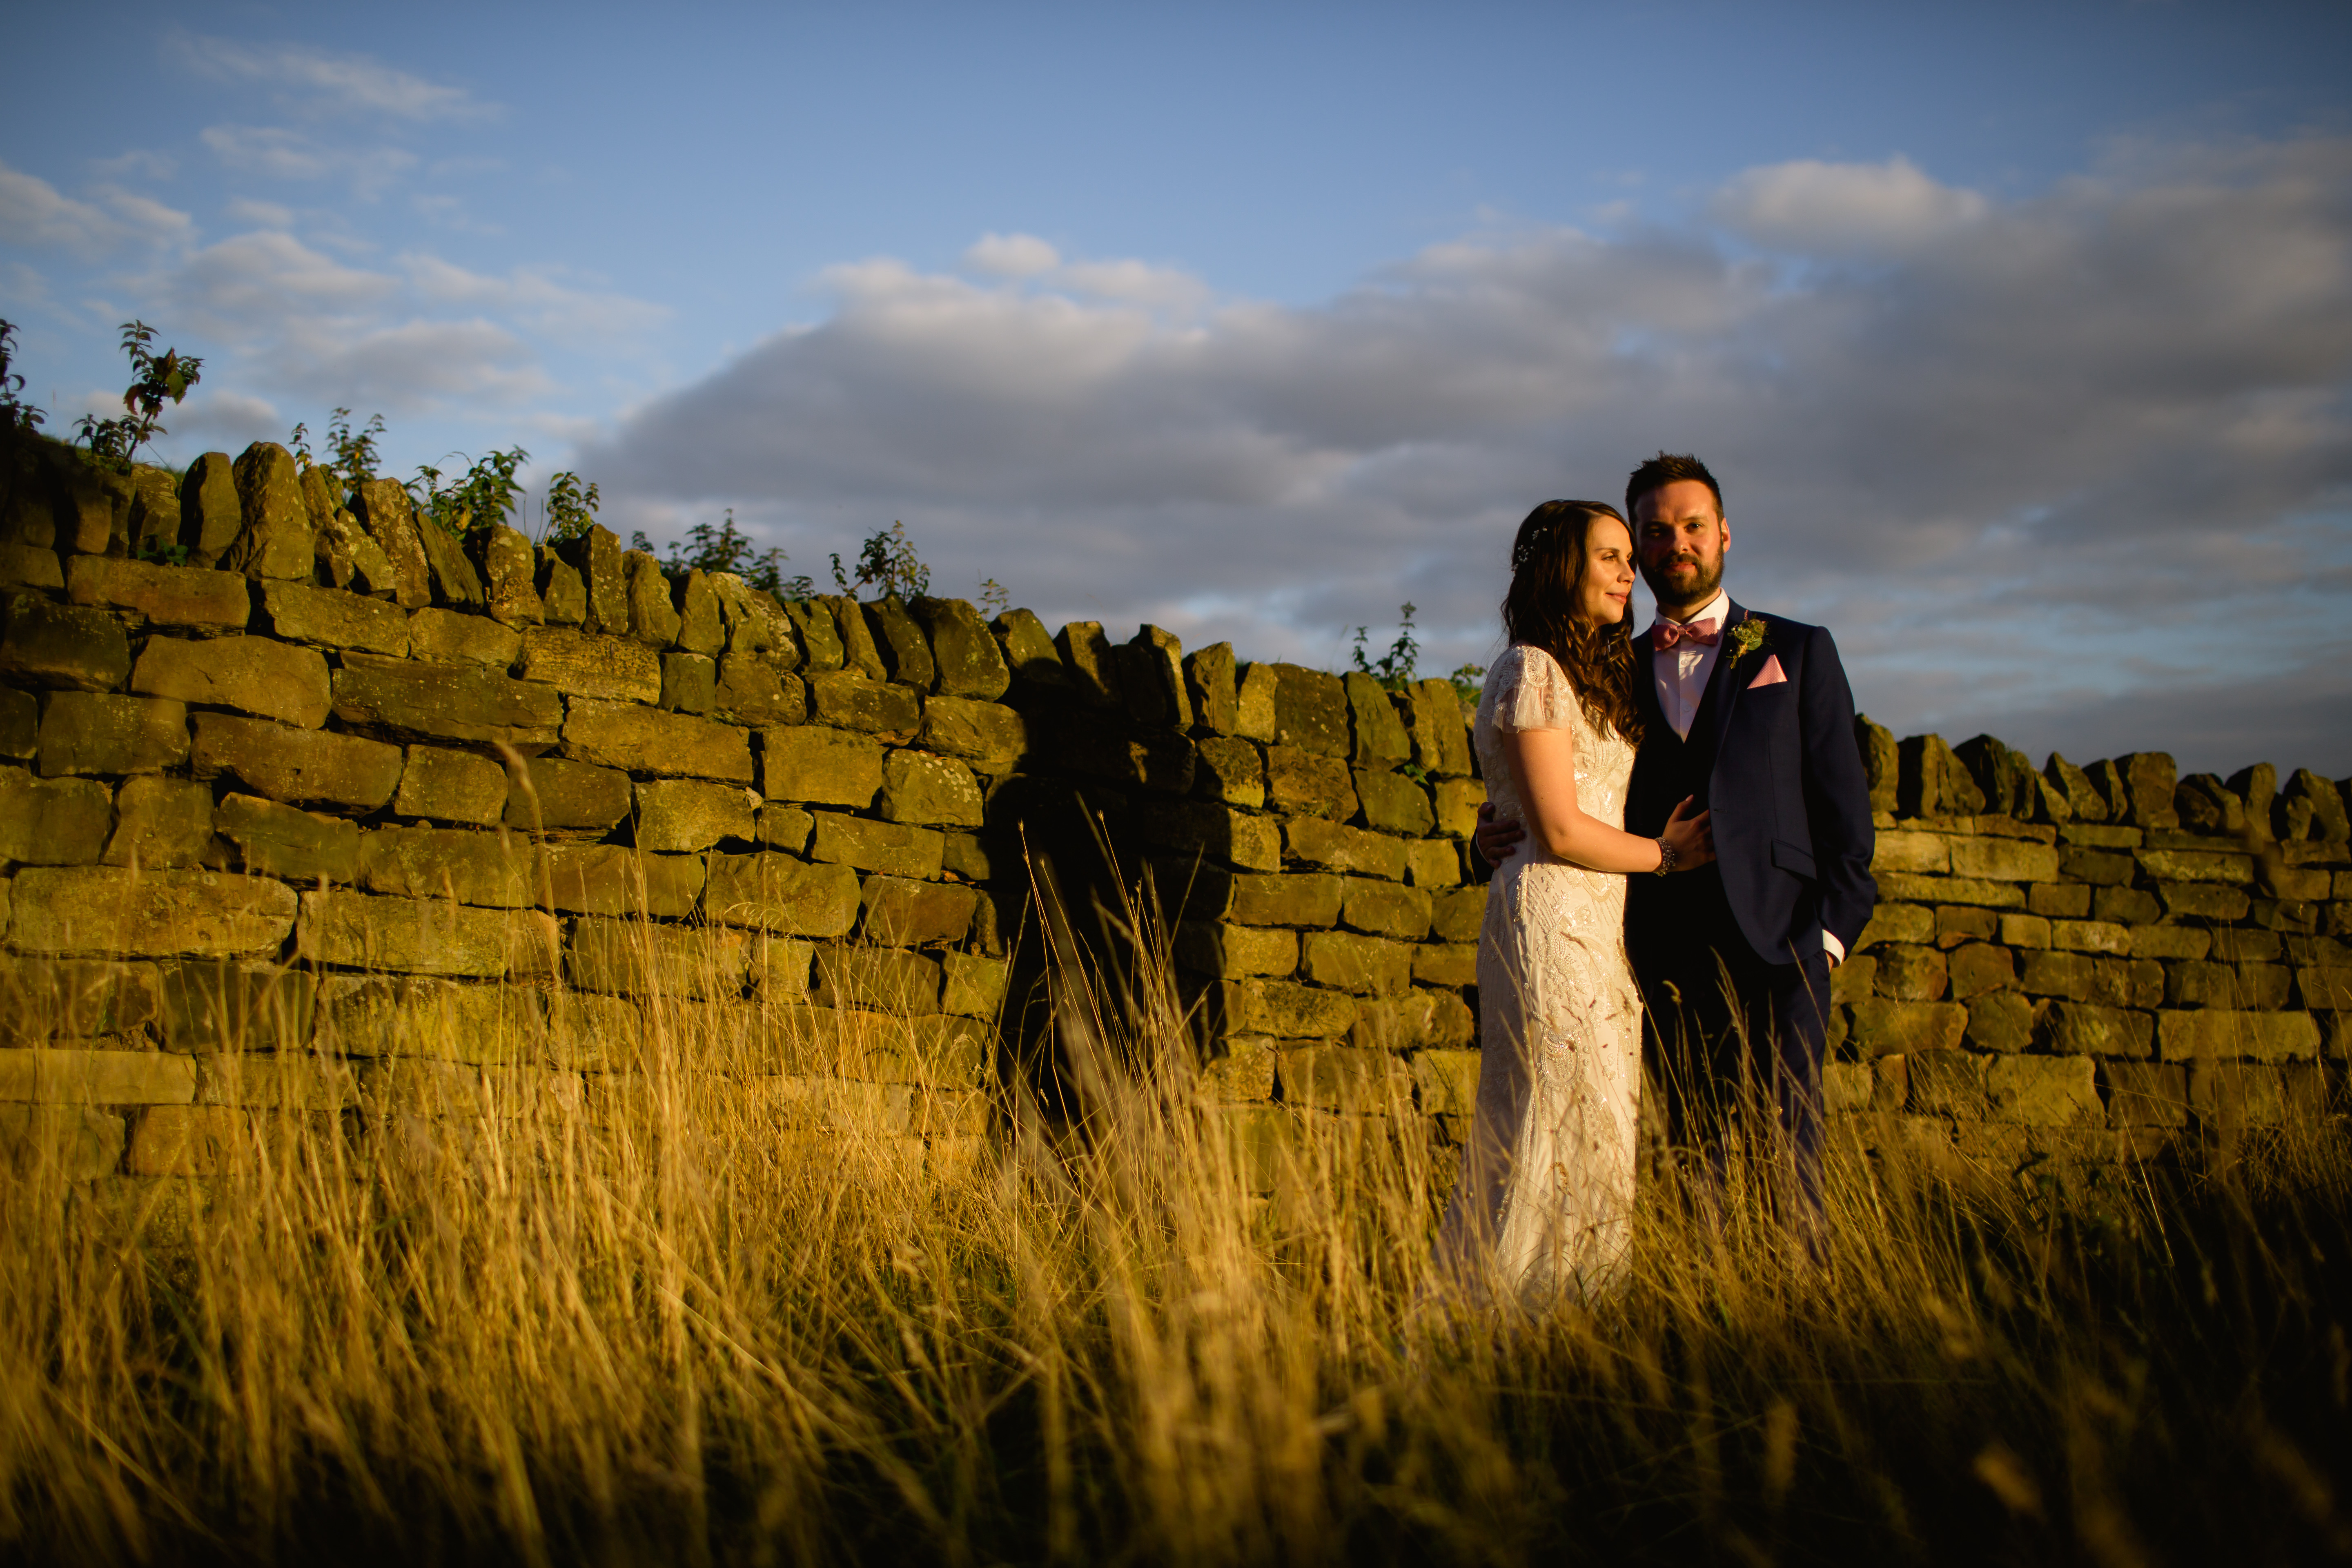 A bride and groom standing in front of a dry stone wall at sunset